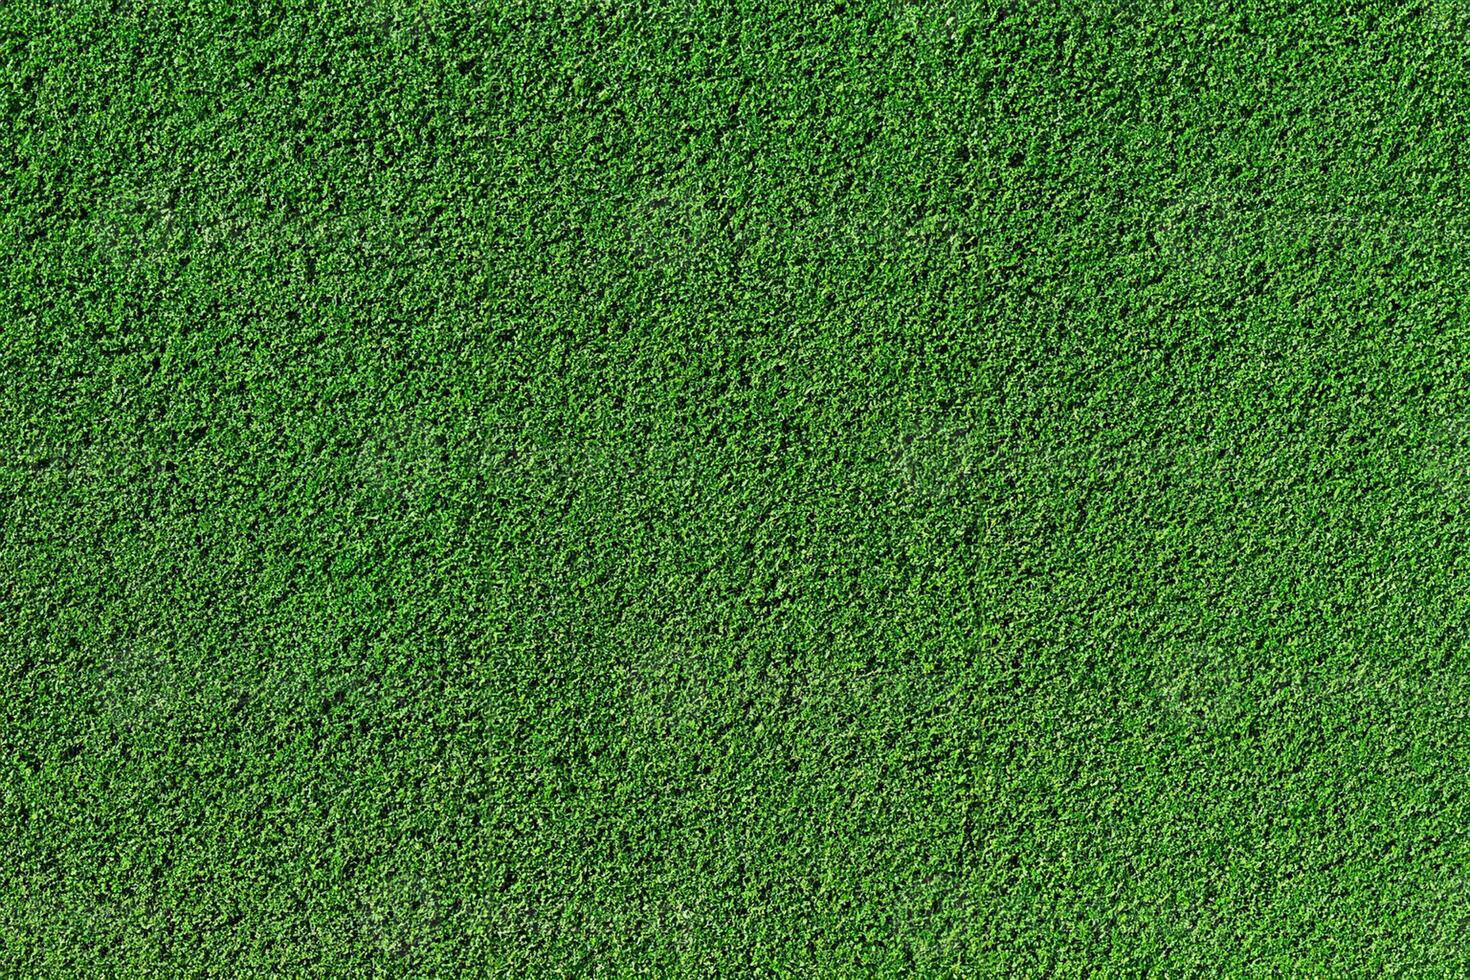 Top Down Perspective, Synthetic Turf Football Pitch Texture Background. photo